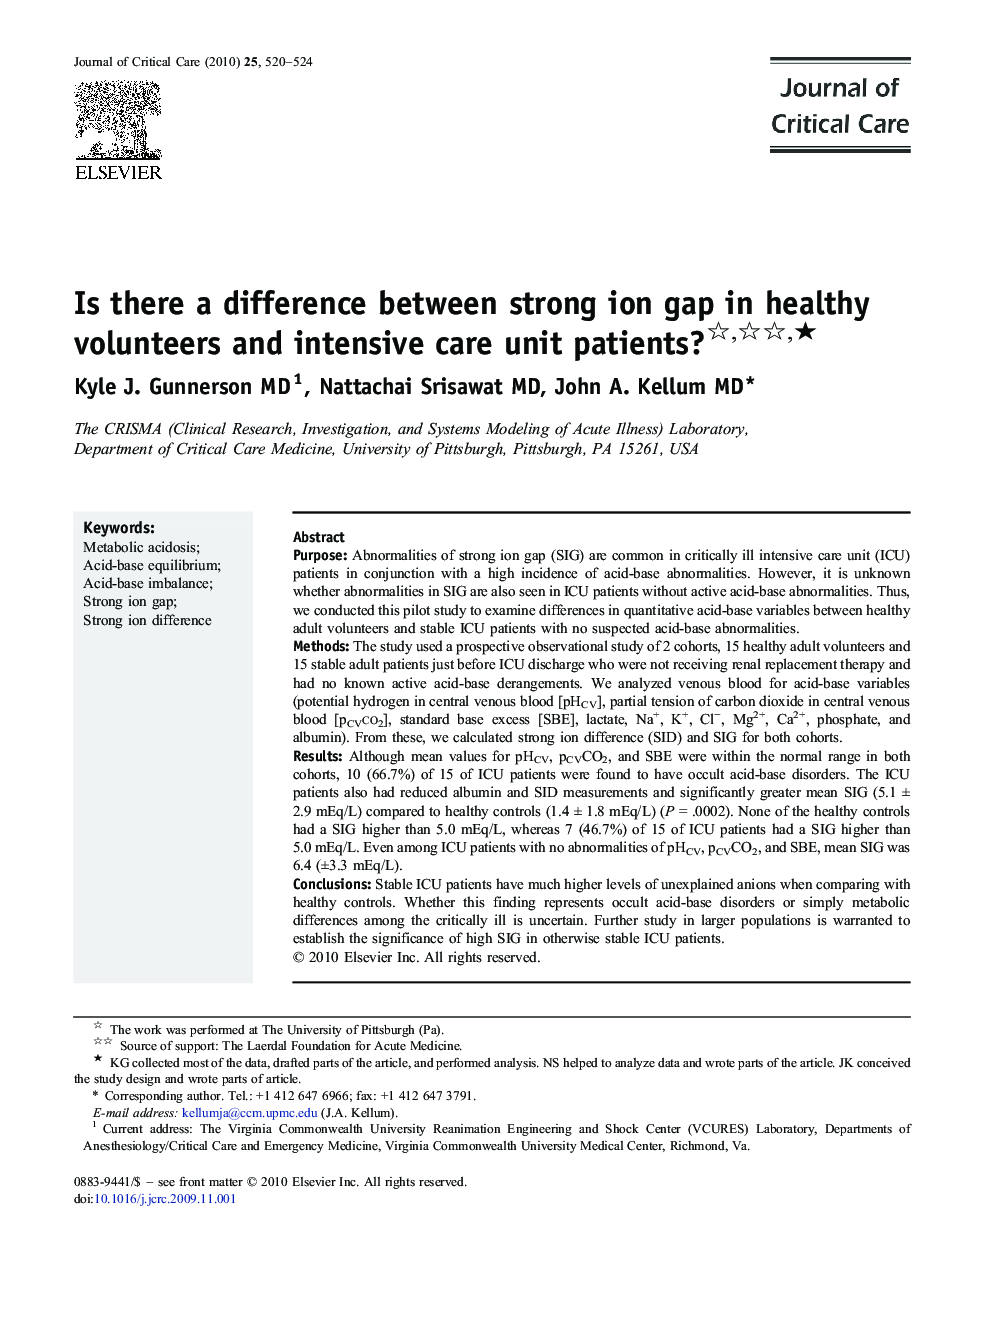 Is there a difference between strong ion gap in healthy volunteers and intensive care unit patients? ★